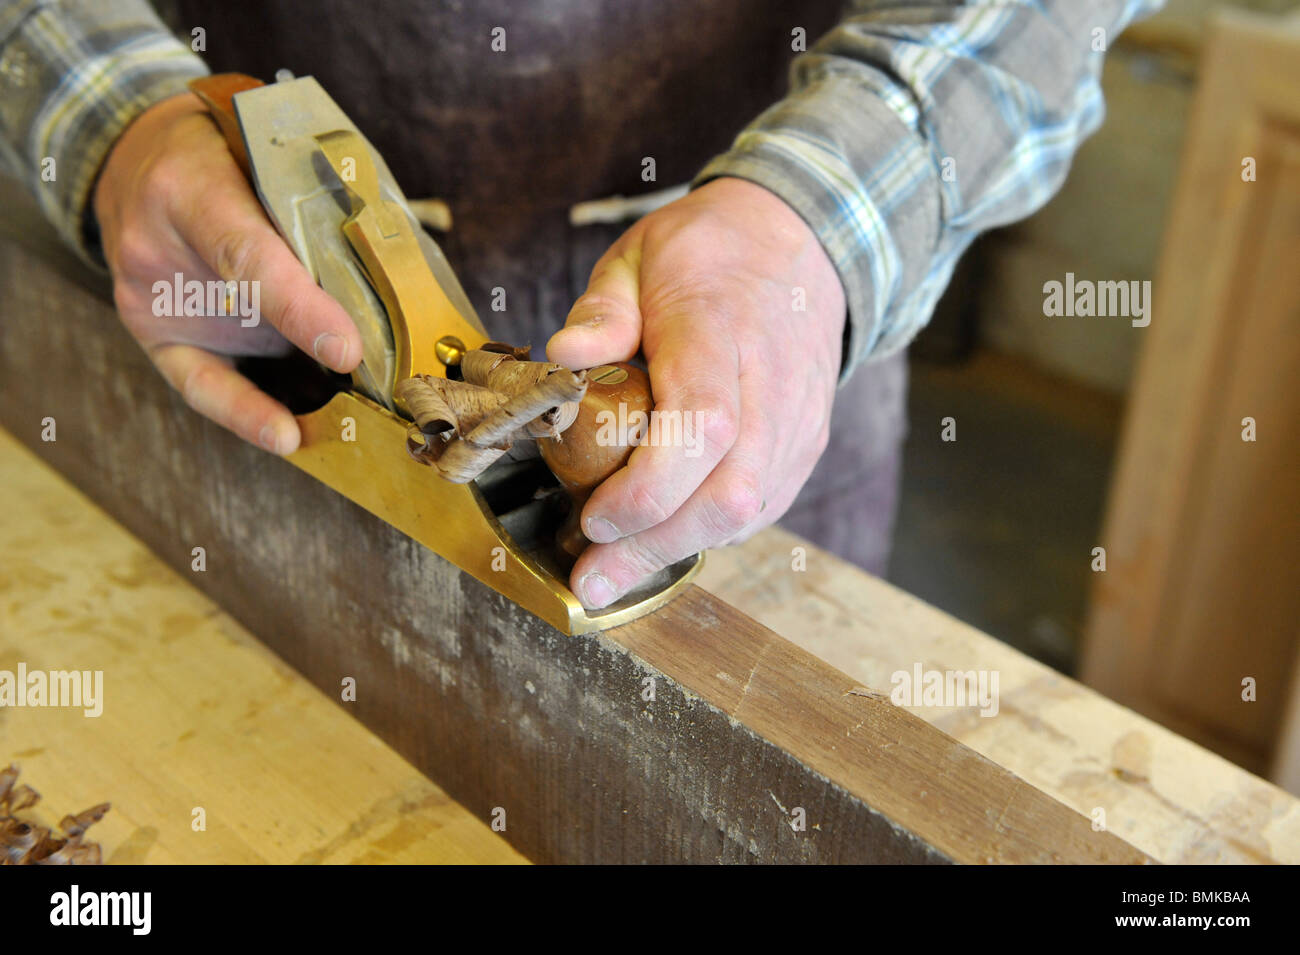 Carpenter crafting wood using a traditional plane Stock Photo